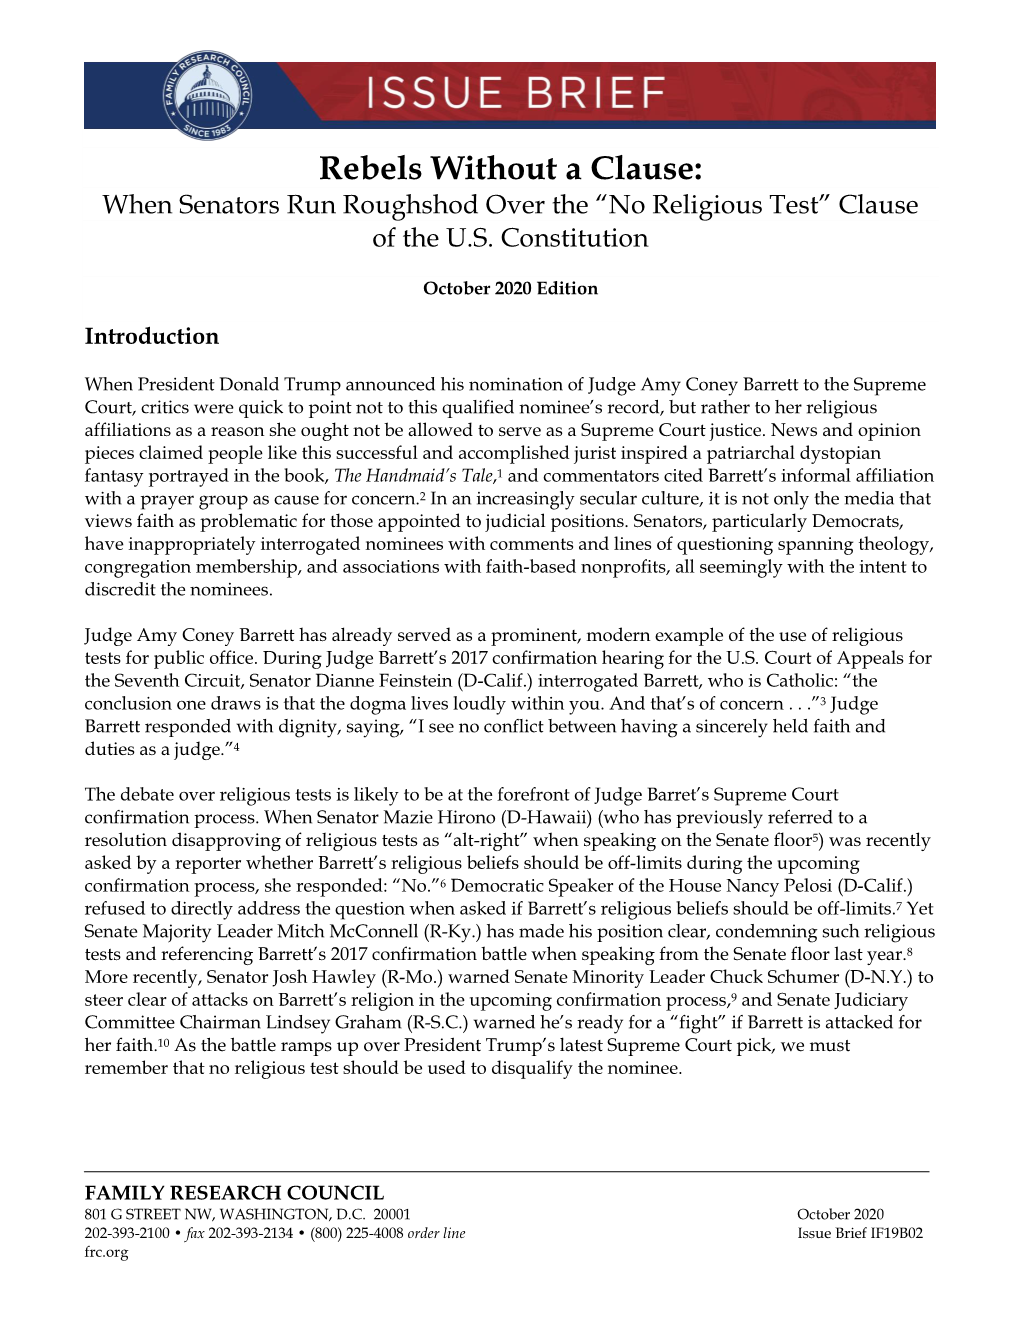 Rebels Without a Clause: When Senators Run Roughshod Over the “No Religious Test” Clause of the U.S